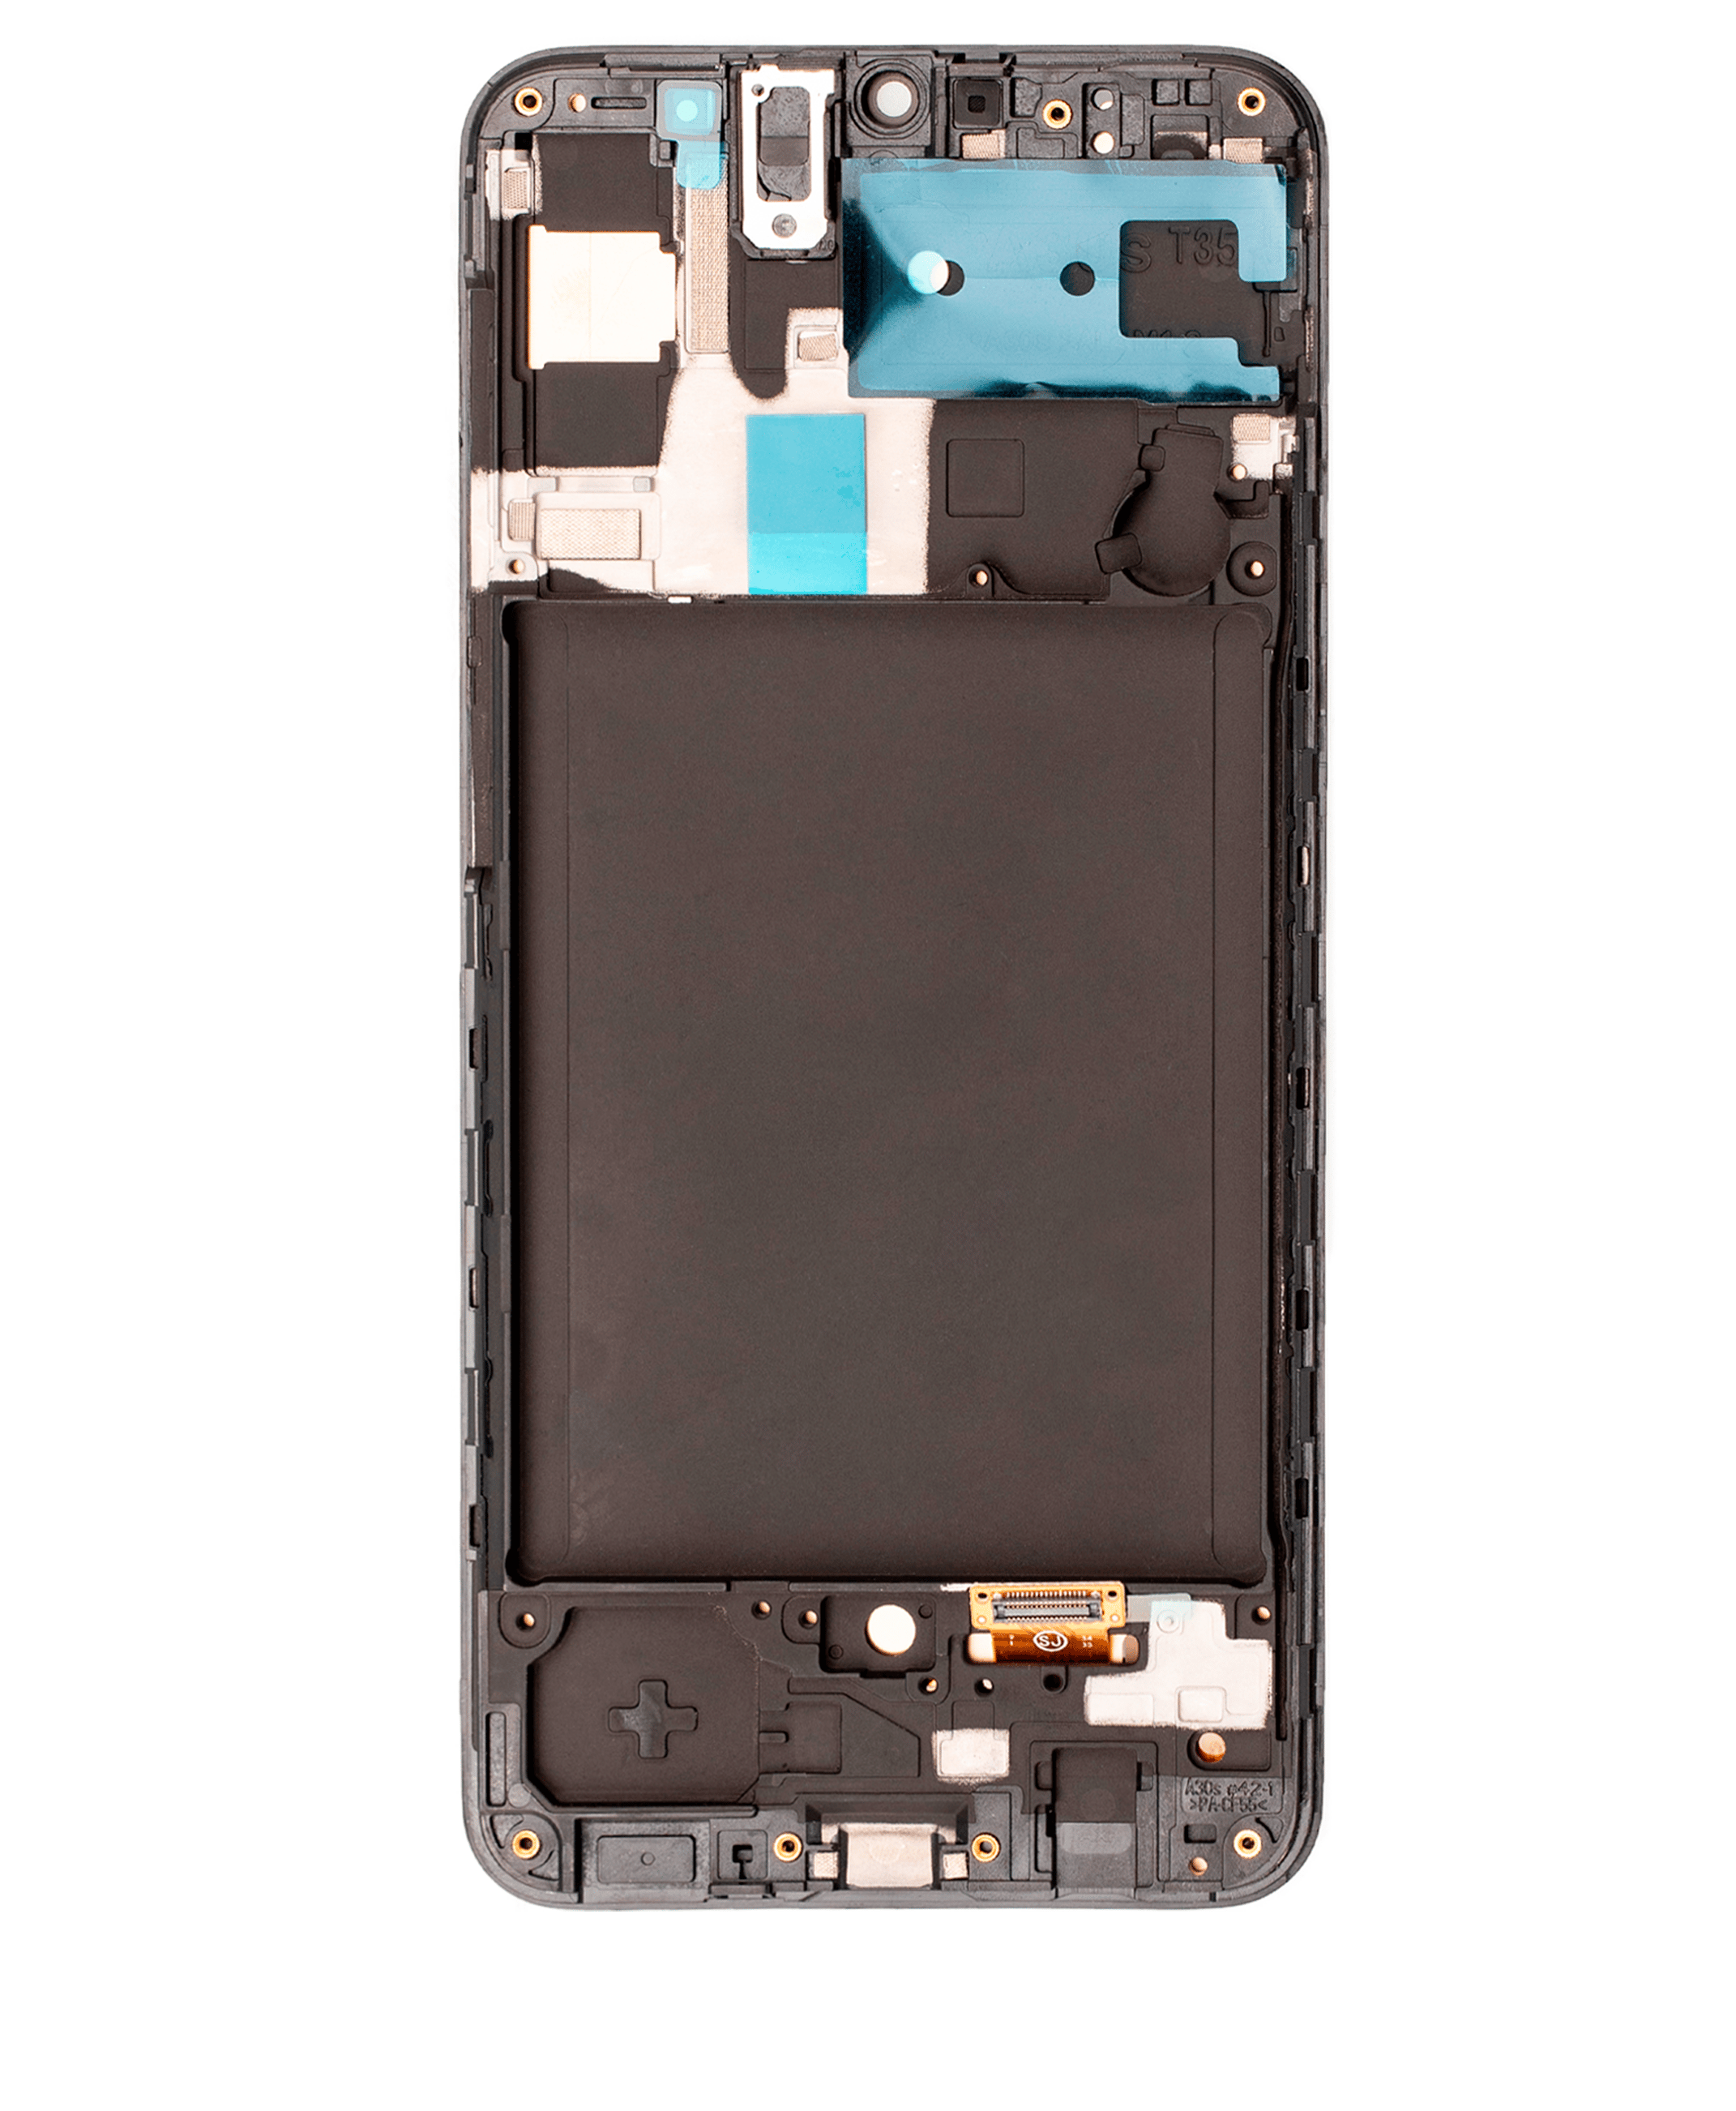 For Samsung Galaxy A30S (A307 / 2019) LCD Screen Replacement With Frame (Aftermarket Pro) (All Colors)